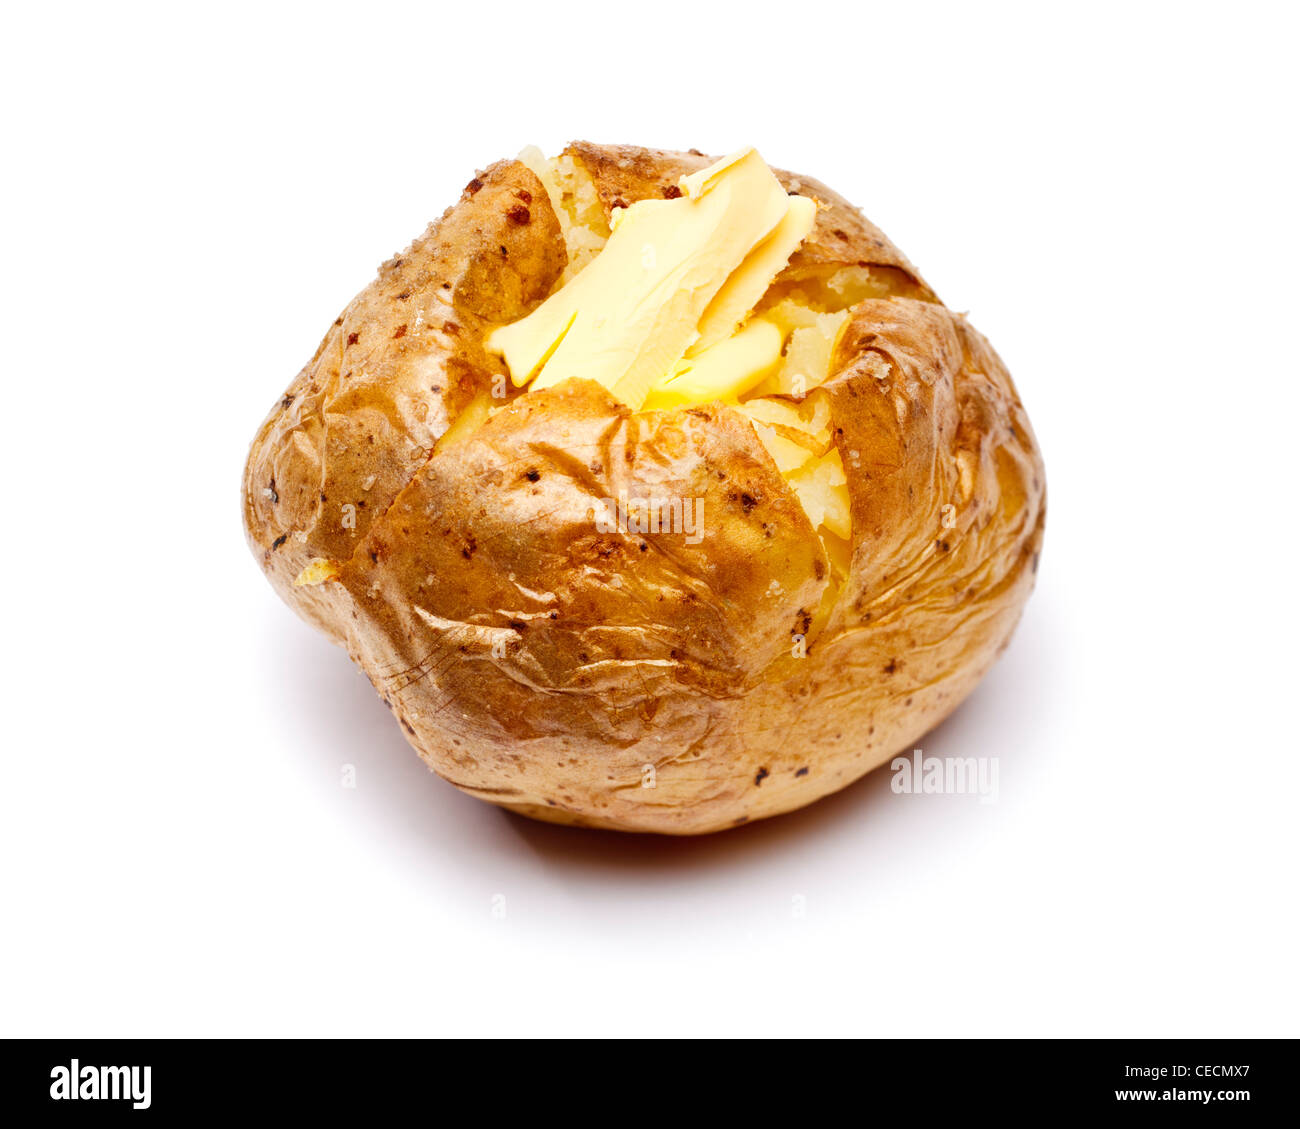 Baked potato with butter on white background Stock Photo